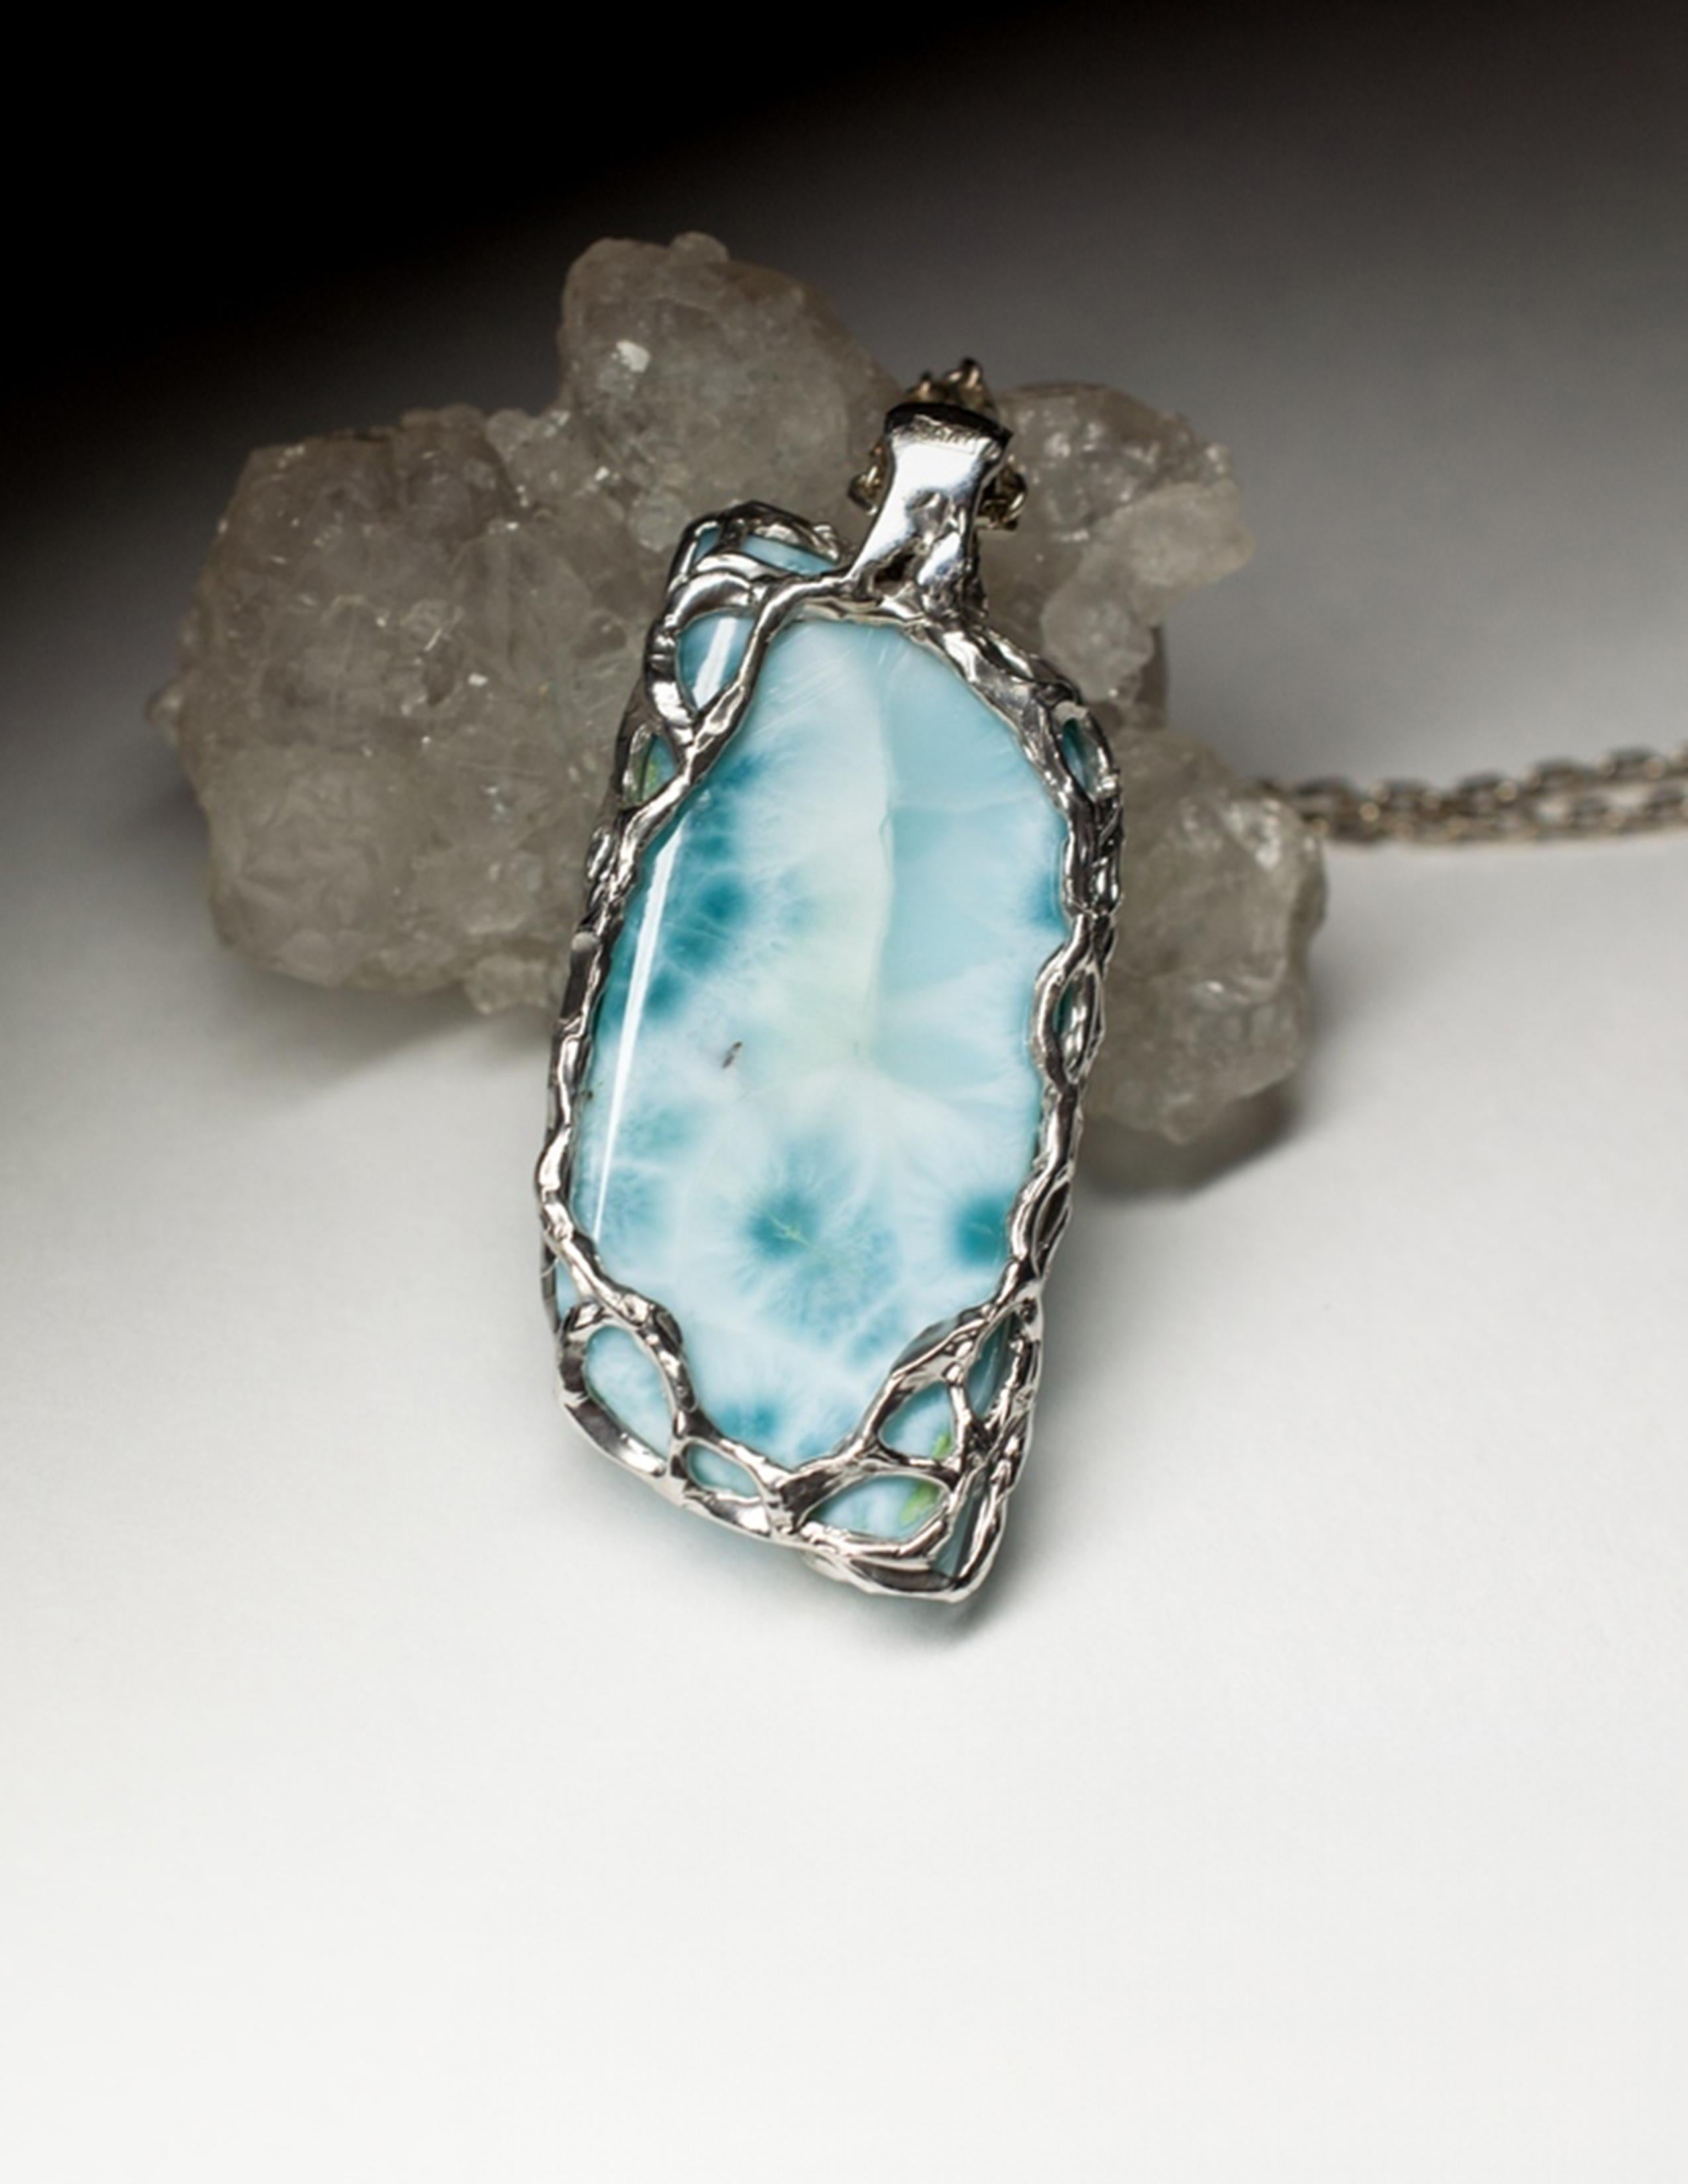 Larimar Silver necklace Blue pendant special person gift wedding anniversary For Sale 2